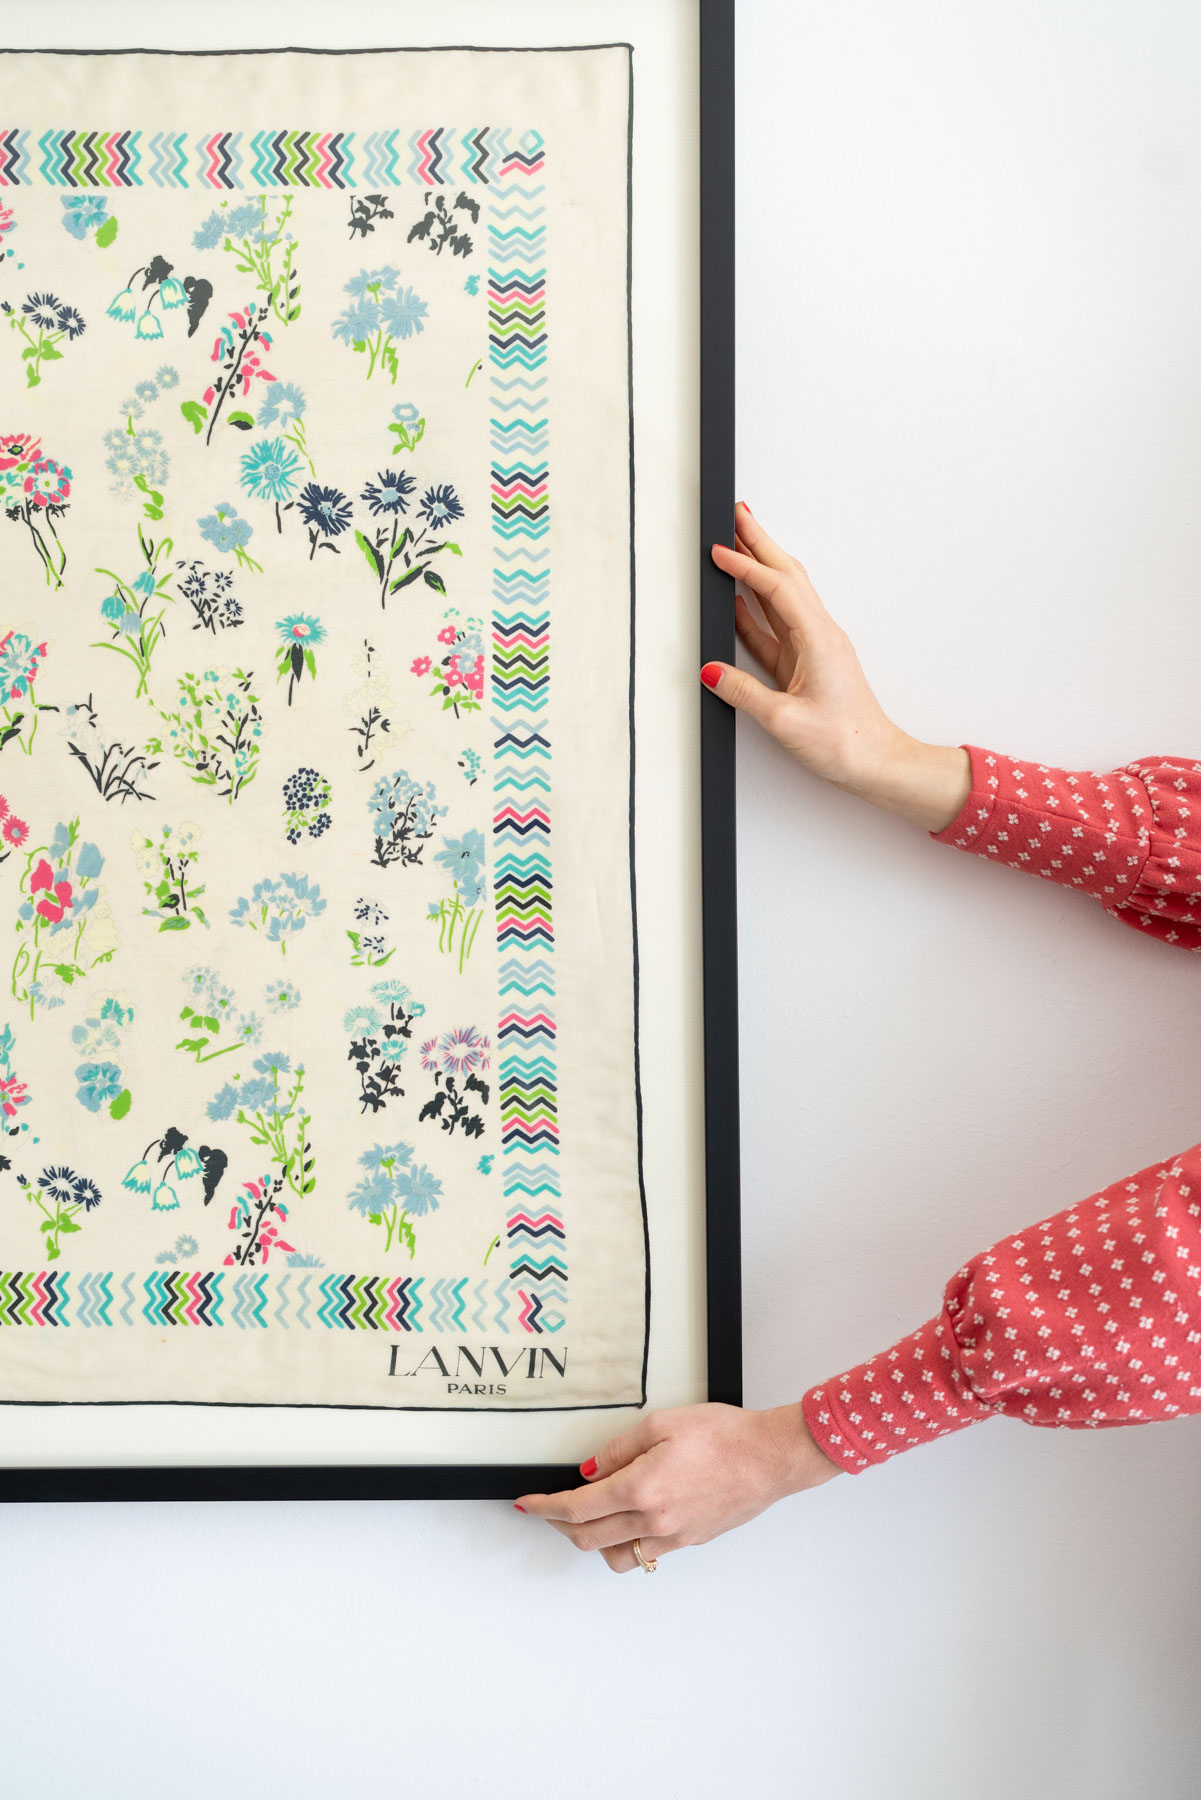 Two hands holding up a colorful, floral vintage silk scarf made by Lanvin Paris.